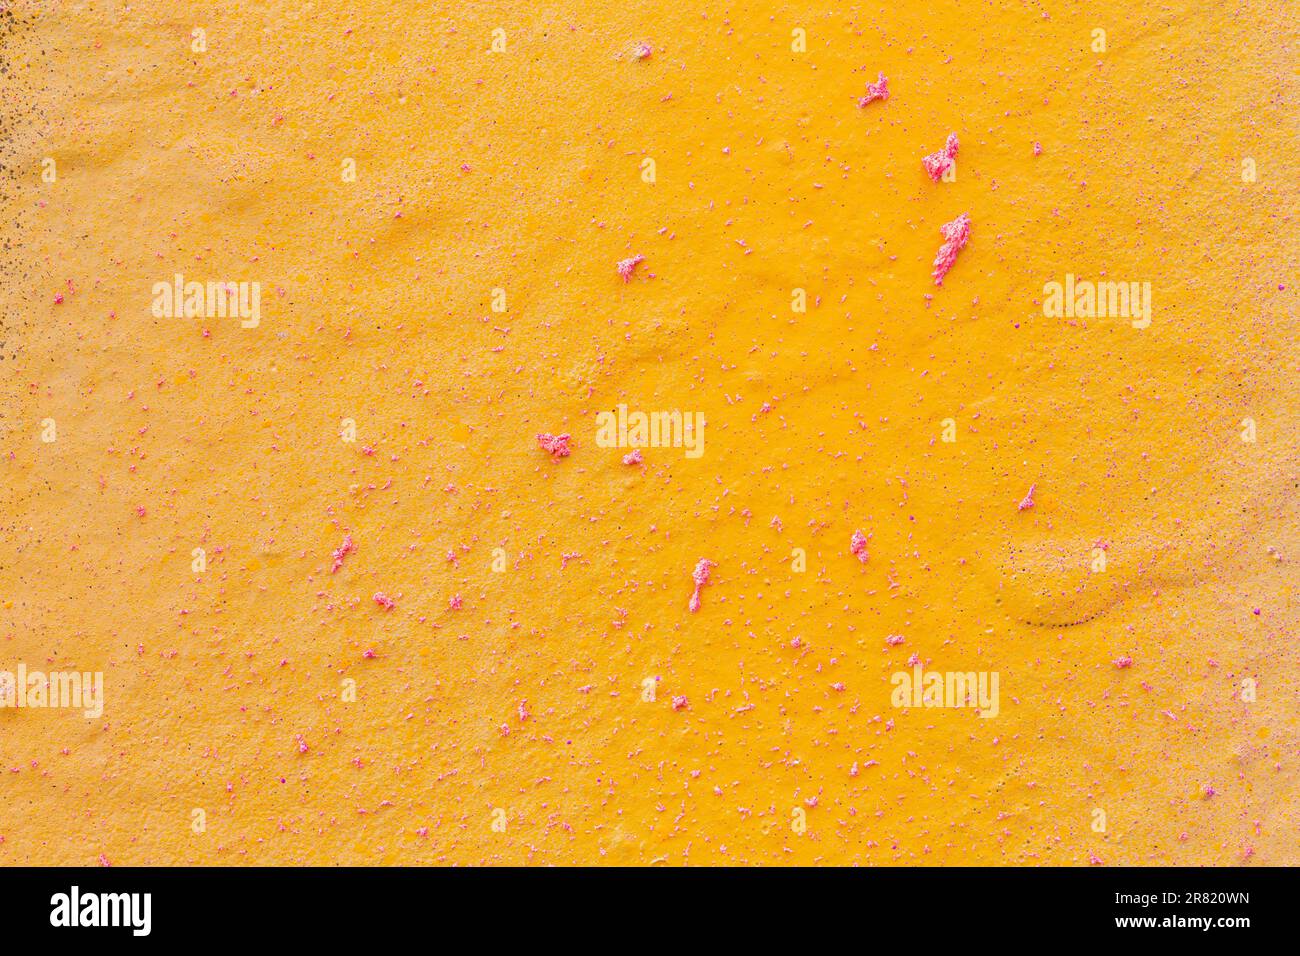 Close-up of a spray painted yellow orange wall with pink splashes. Abstract full frame textured grunge graffiti background with copy space. Stock Photo